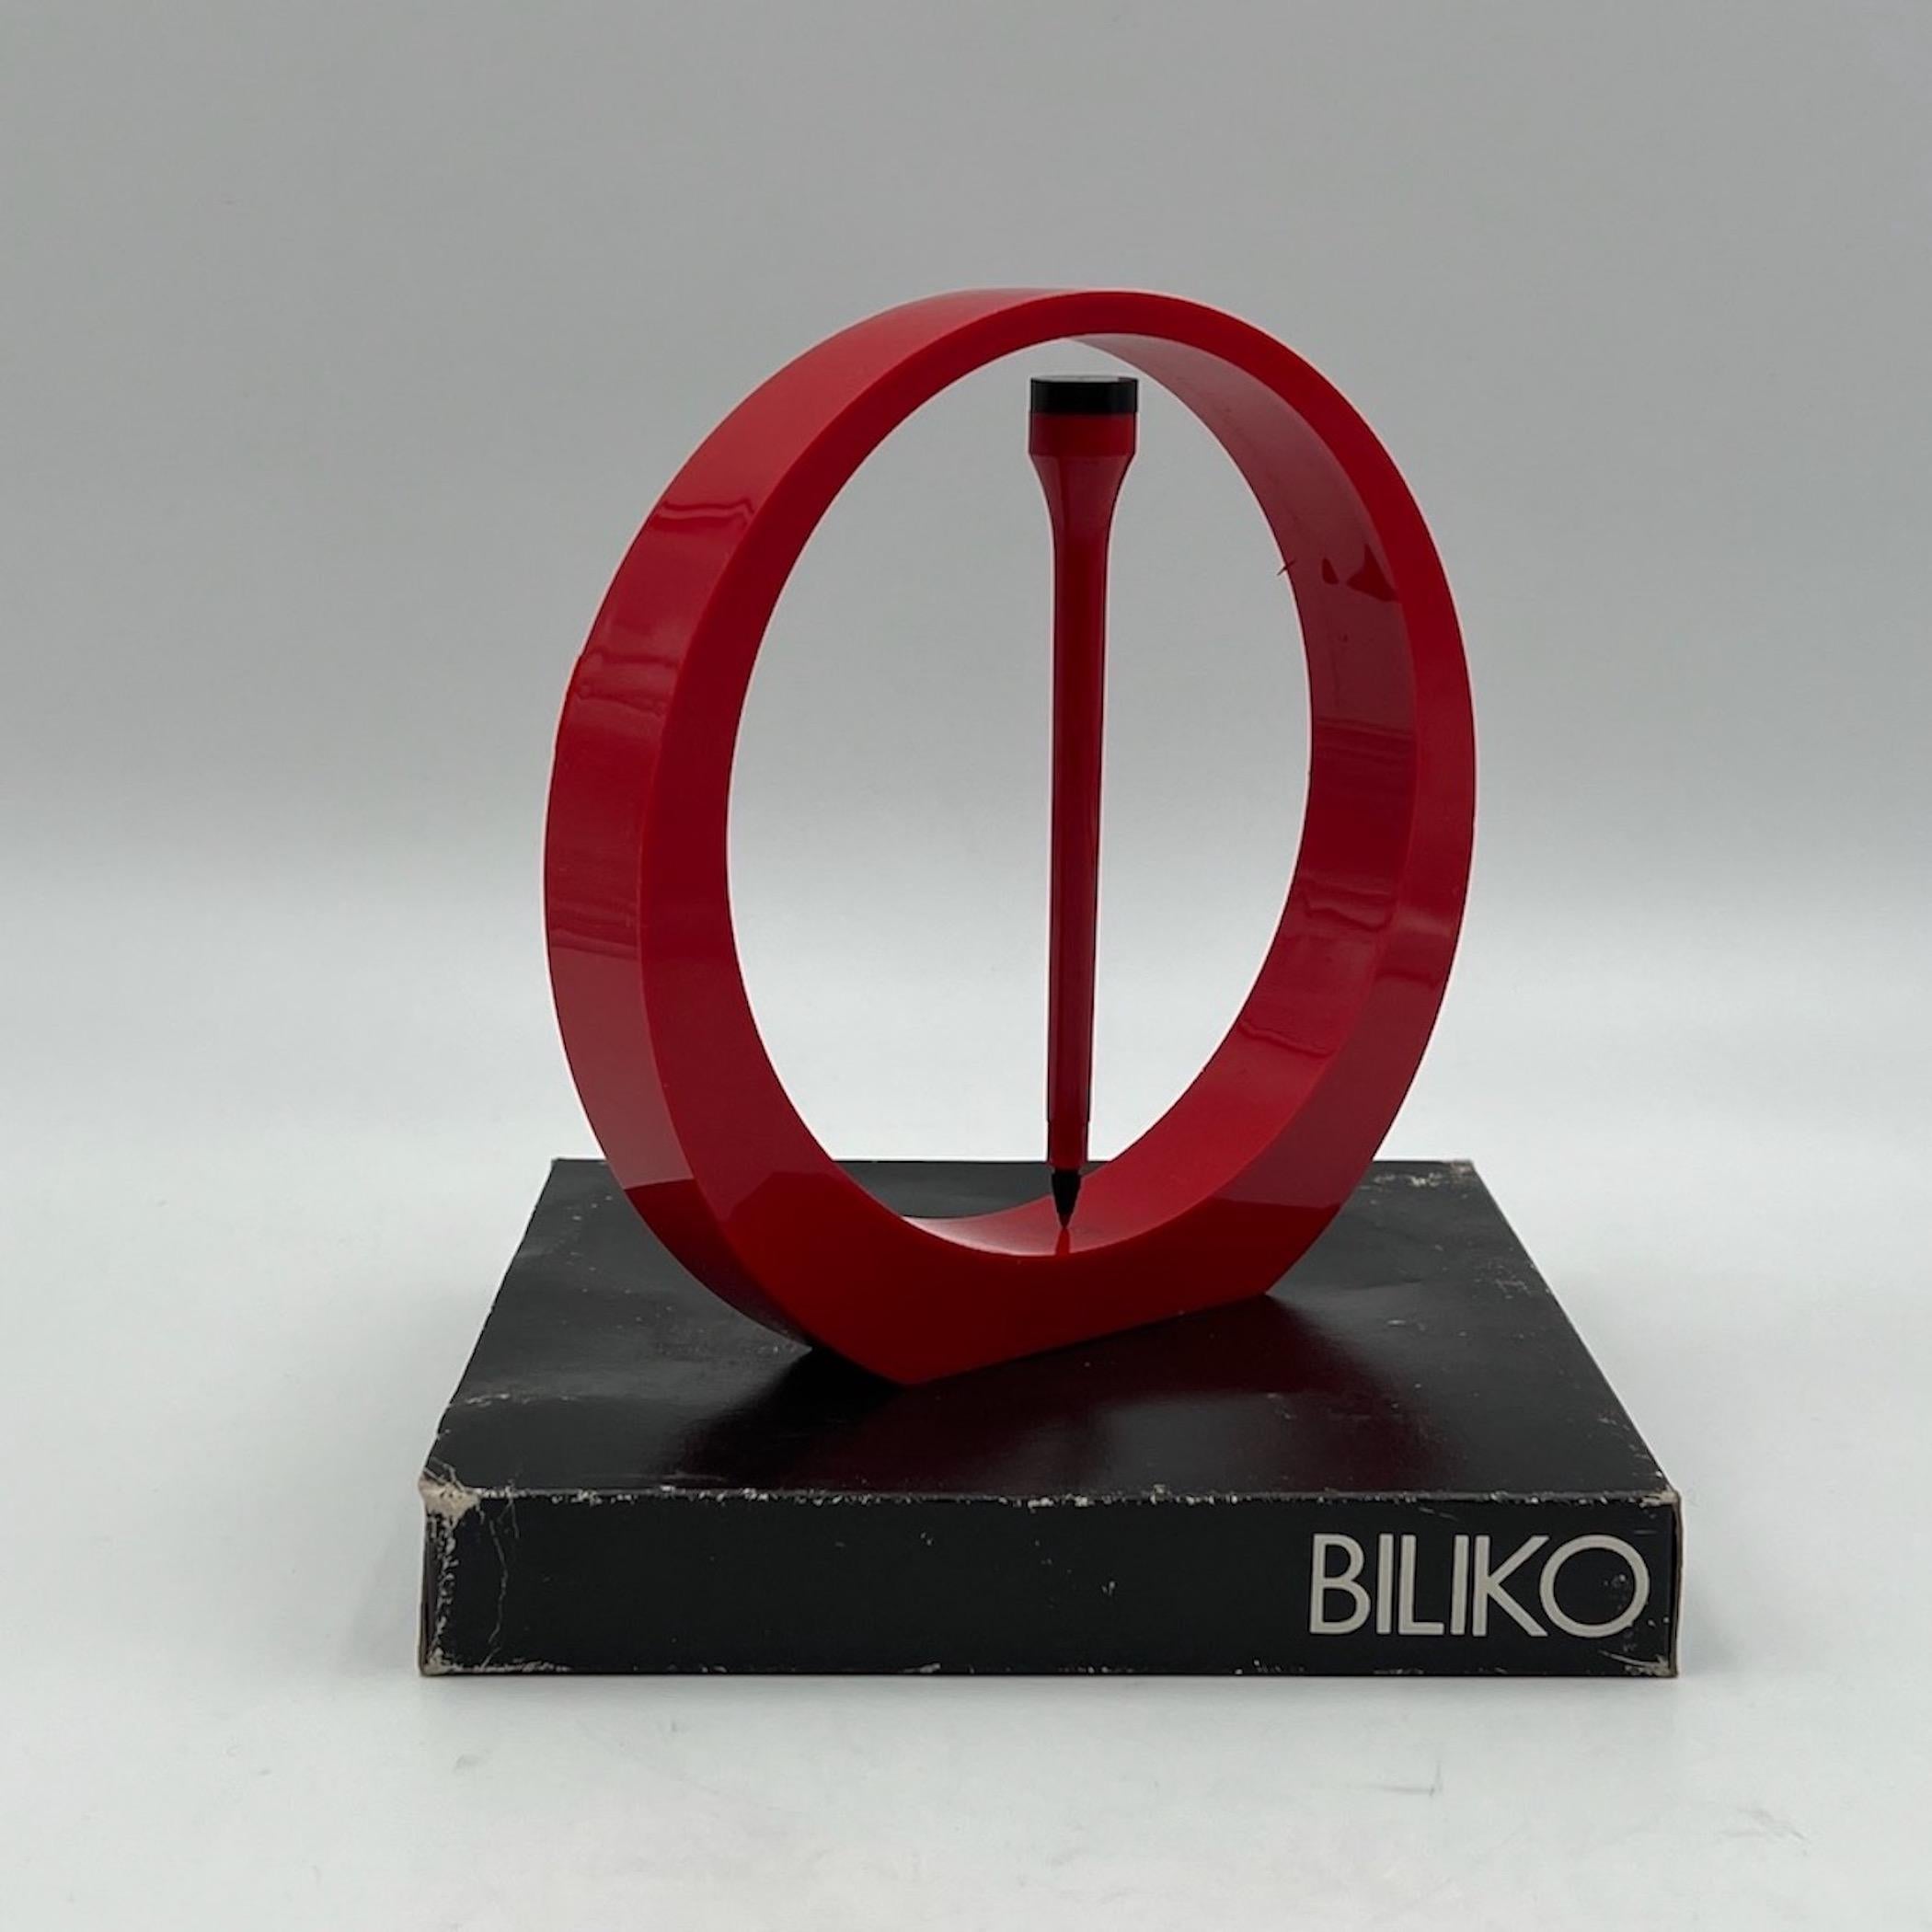 Eye catching and rare writing set ‘Biliko’ set, with stylish round support and matching pen made in Italy in the 70s.

Biliko (actually ‘bilico’) is the Italian word for ‘balance’ or ‘pivot’. As a matter of fact, the peculiarity of this set is the